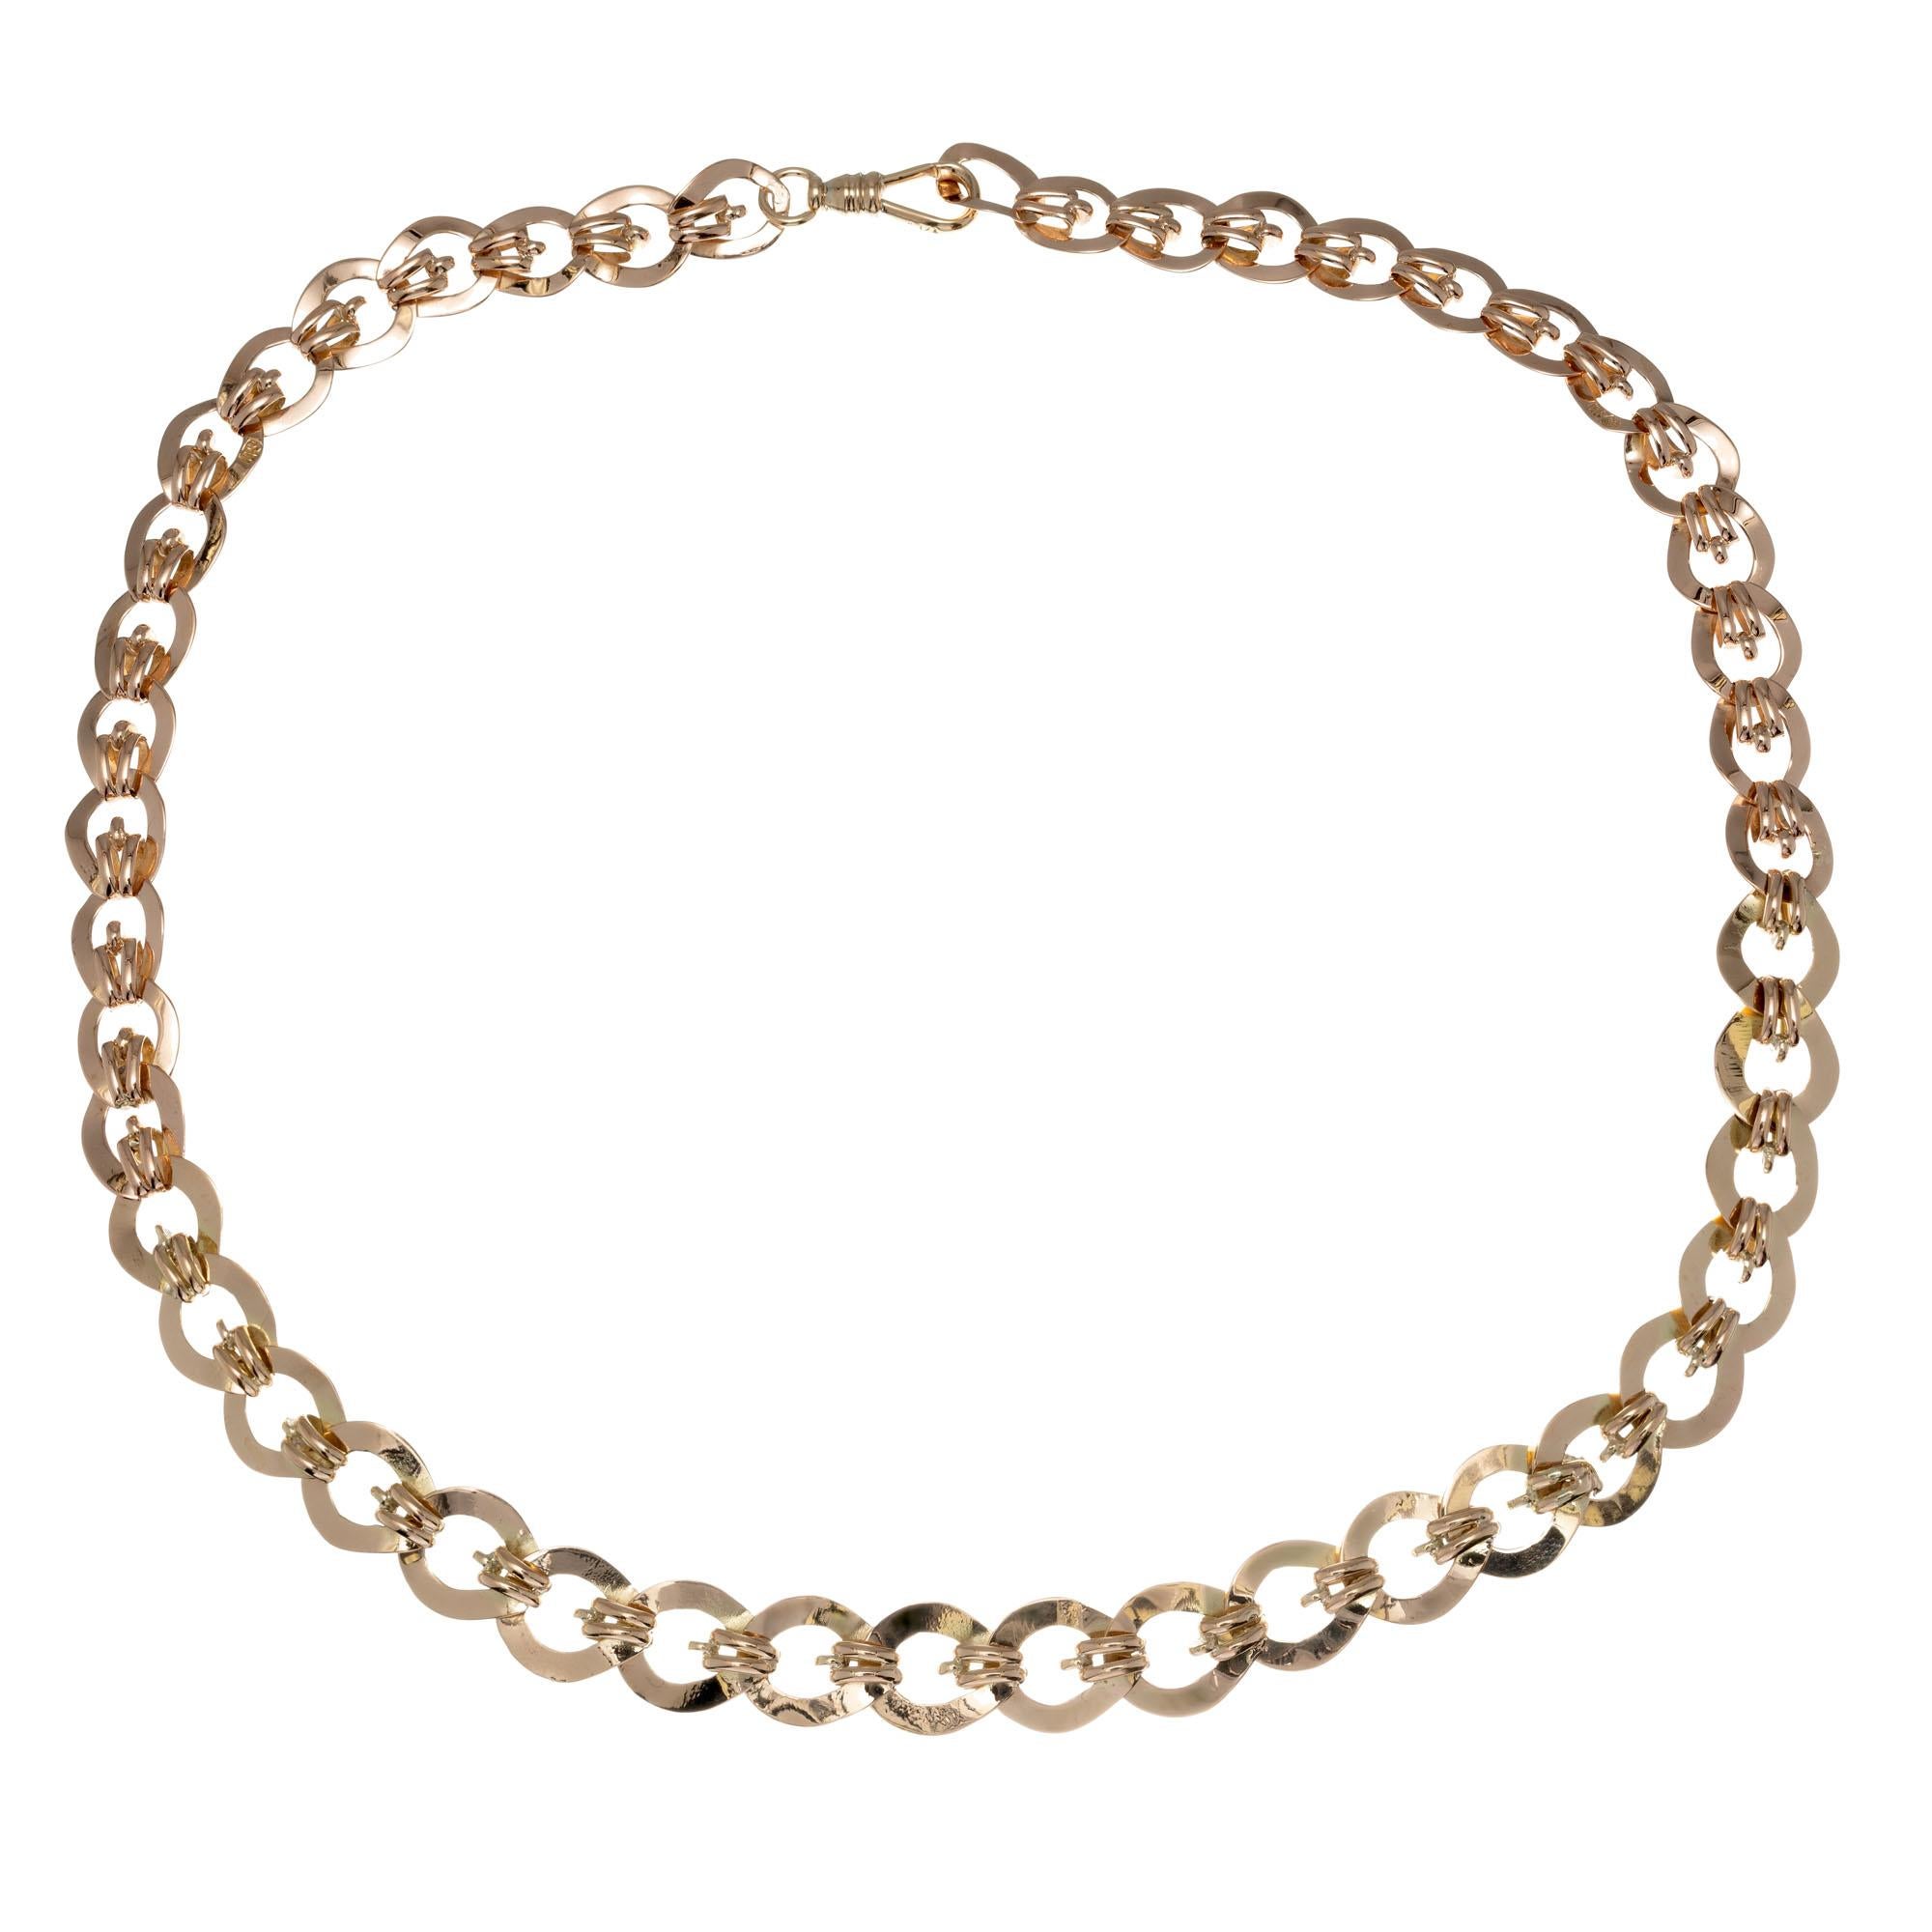 1900's two tone 14k yellow and rose gold link necklace. Swivel catch. 19.75 Inches long.

14k yellow gold 
14k rose gold 
Tested: 14k
34.5 grams
Total length: 19.75 Inches
Width: 9.8mm
Thickness/depth: 4mm

